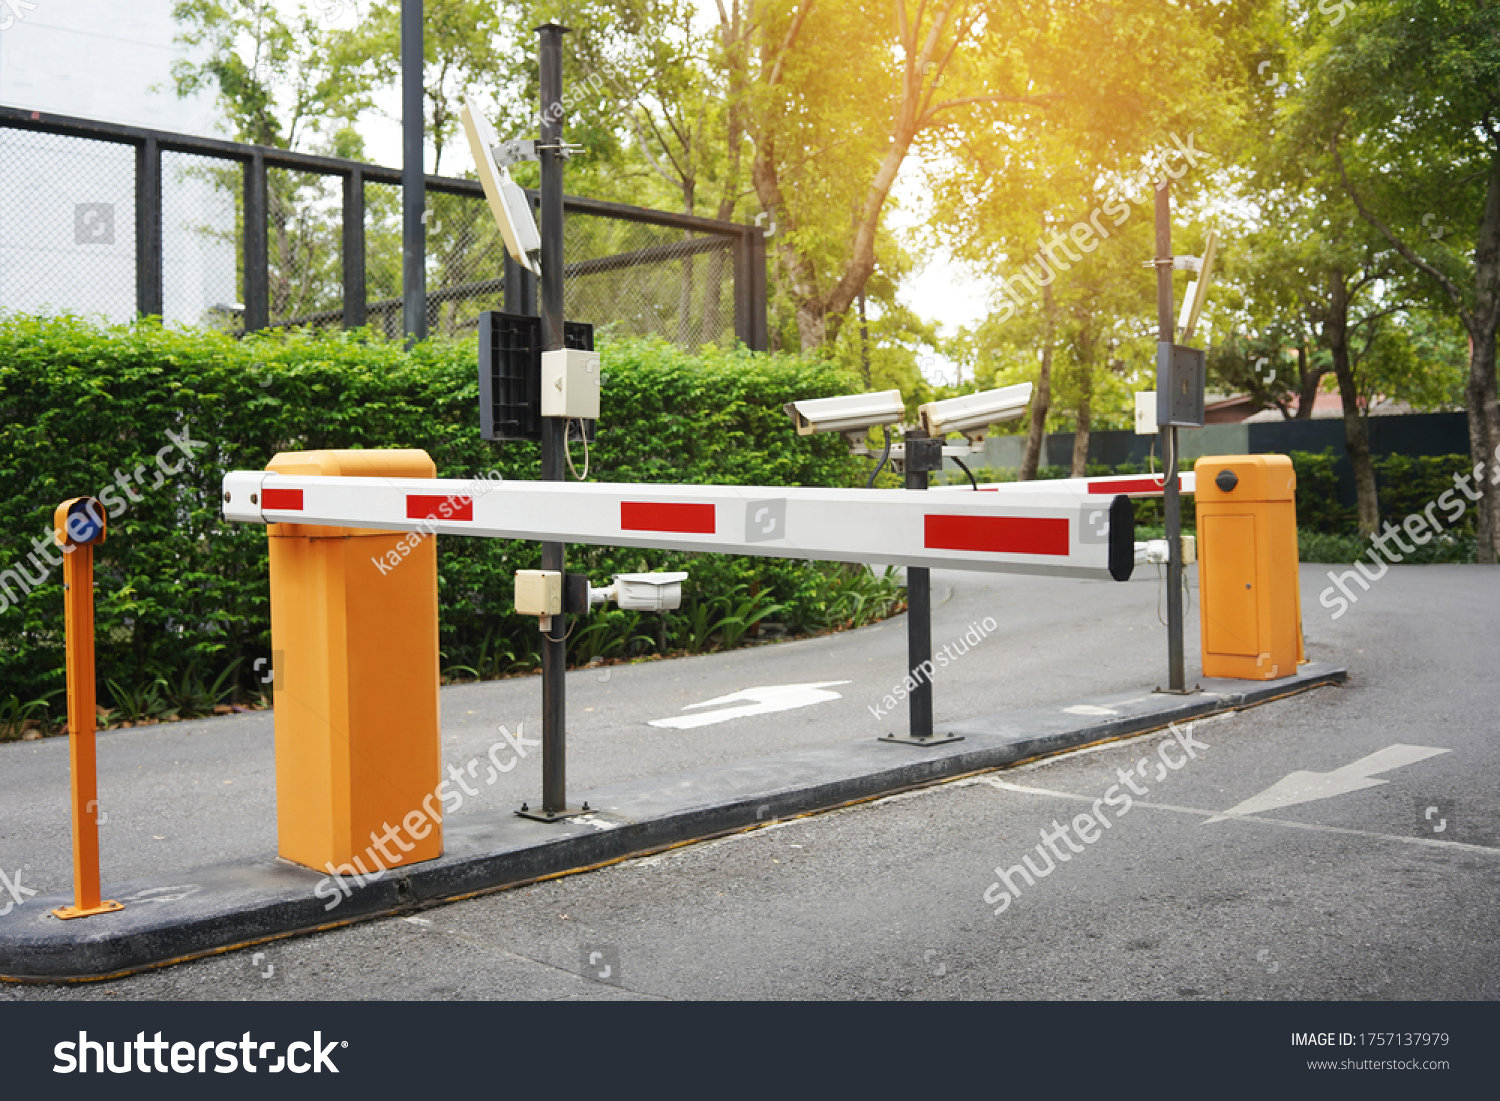      Automatic Barrier Gate , Security system for building and car entrance vehicle barrier                                     